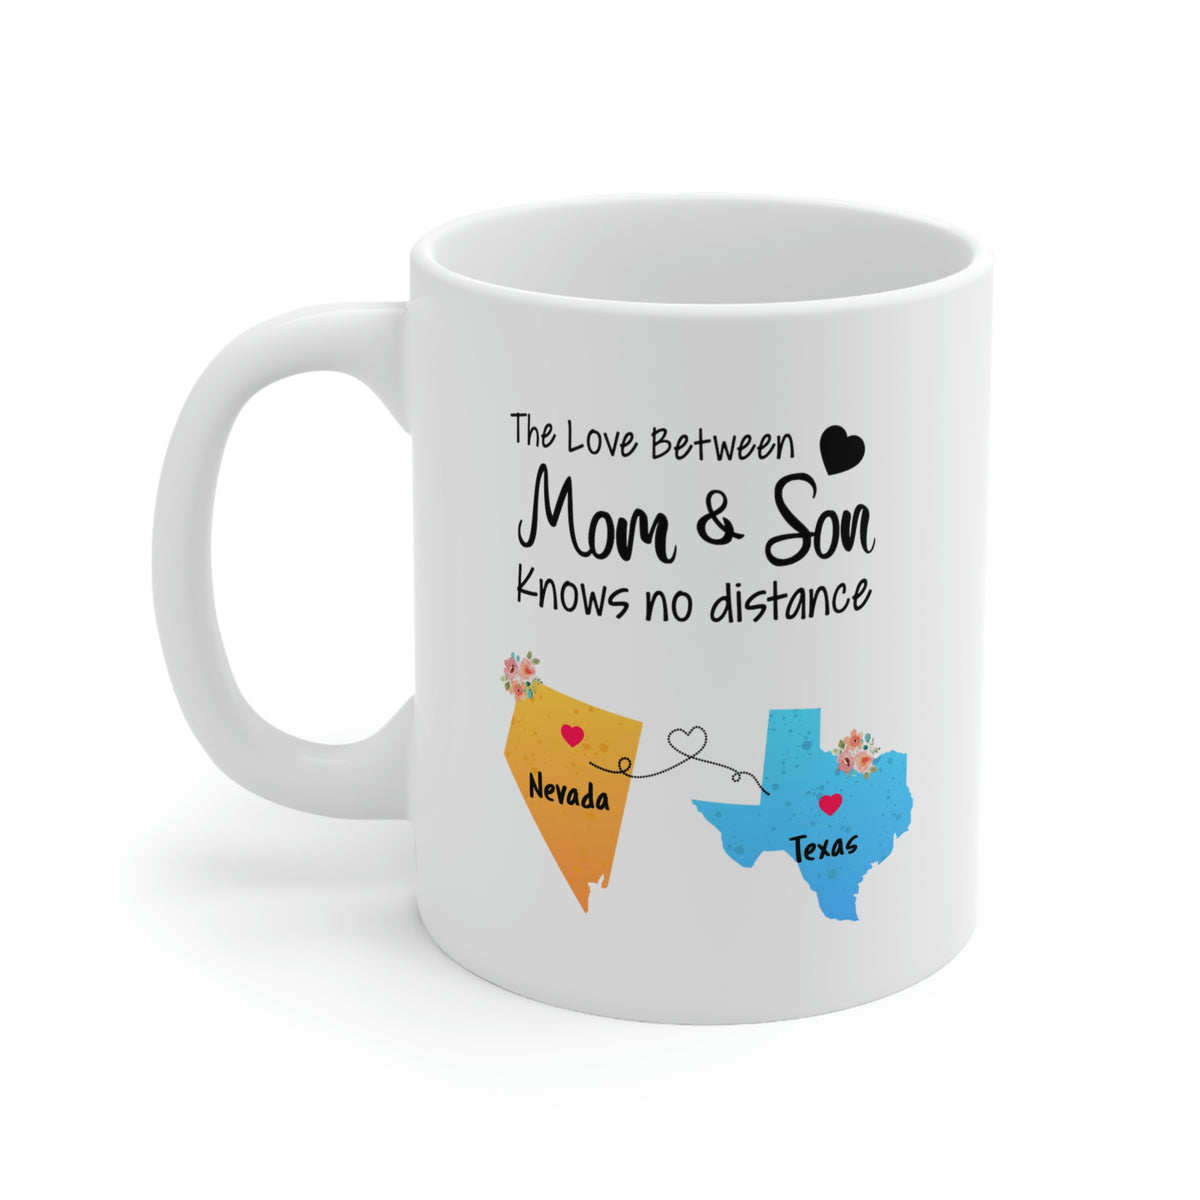 Nevada Texas Mother's Day Gifts - Love Mom & Son - Long Distance Home State 11 OZ Coffee Mug for Mom